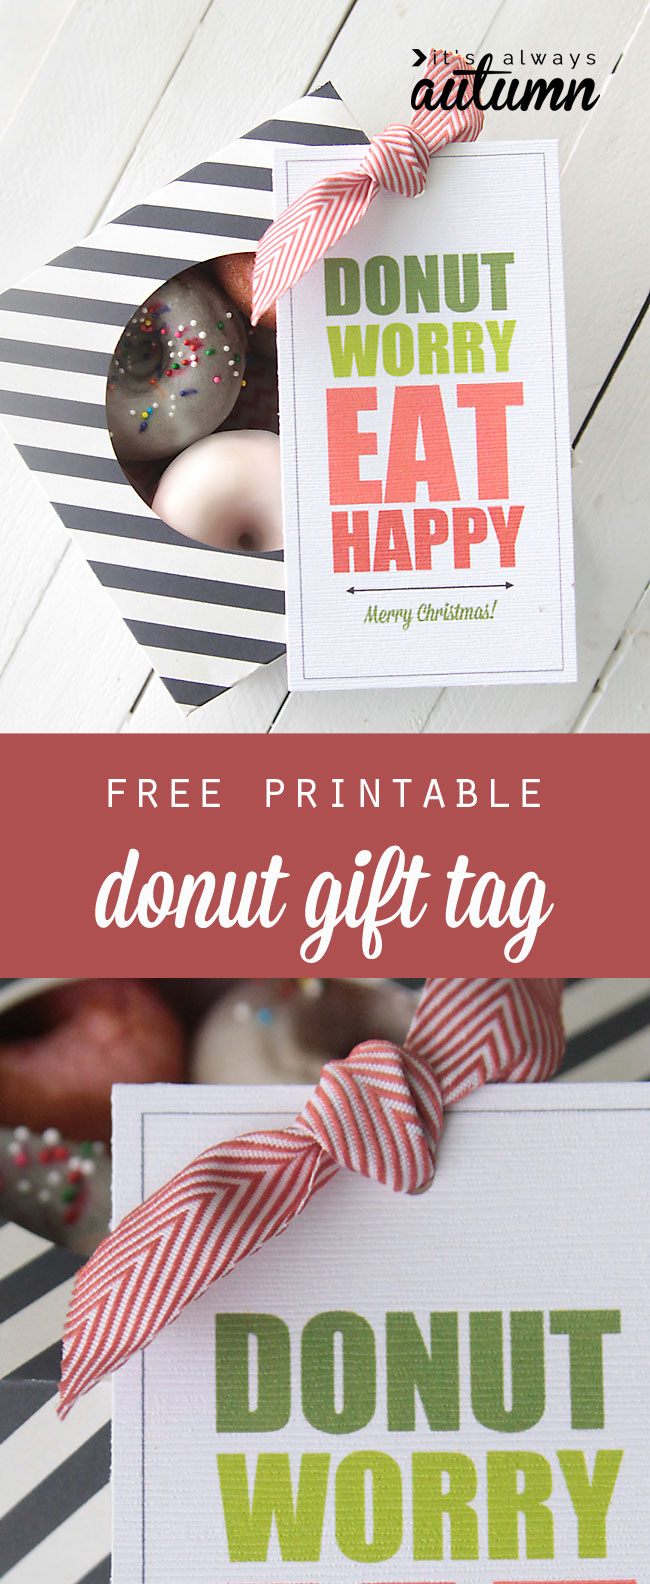 donut-worry-eat-happy-free-printable-donut-gift-tags-its-always-donut